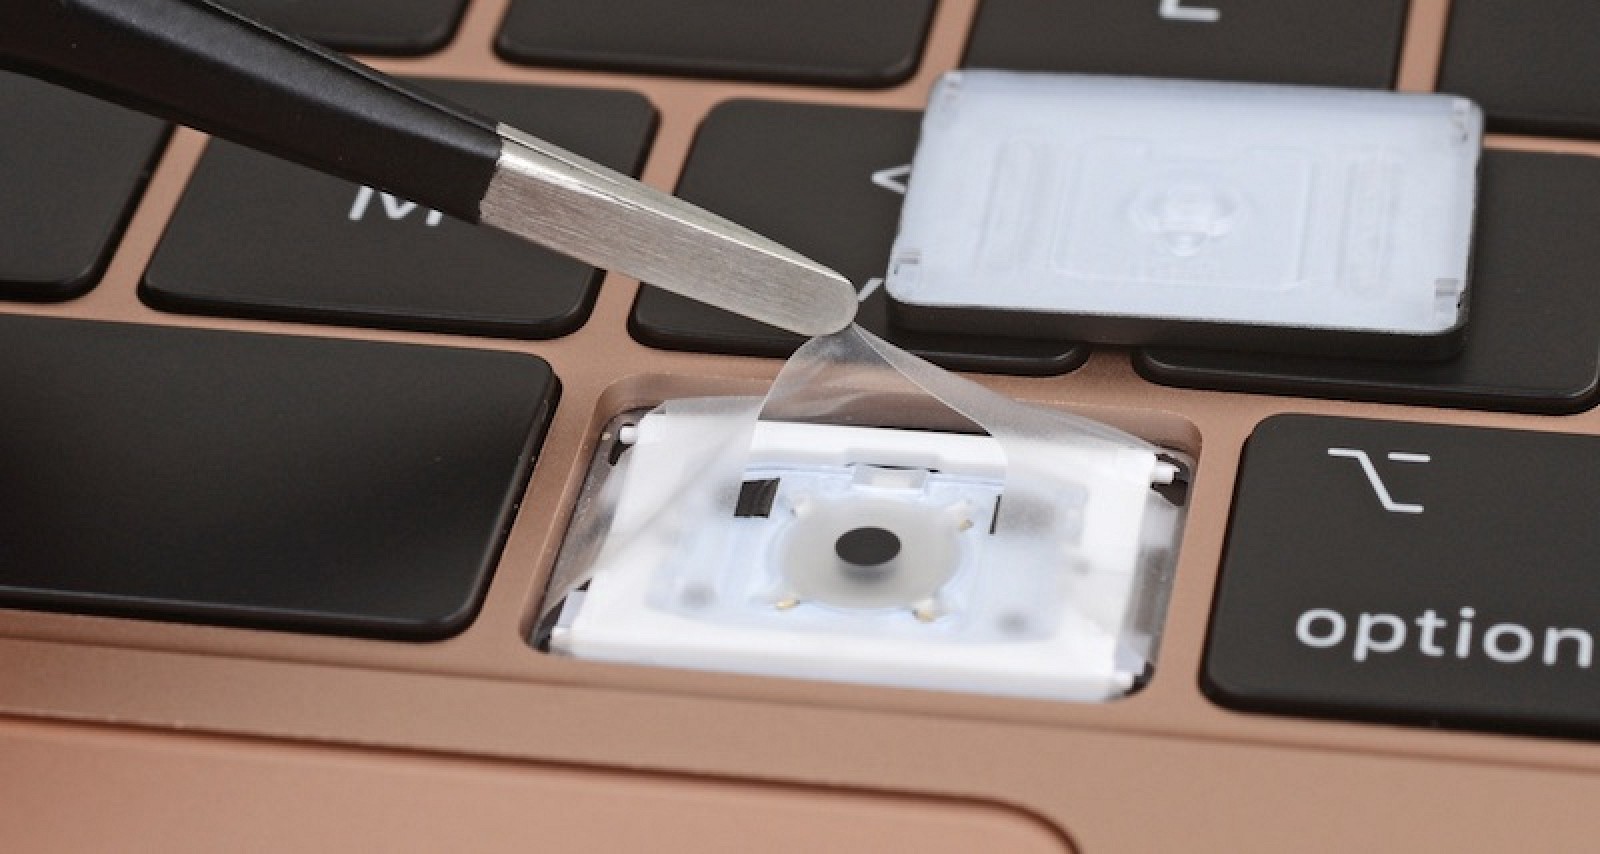 photo of 2018 MacBook Air Teardown Confirms Improving Repairability With Adhesive Pull-Tabs Under Battery and Speakers image